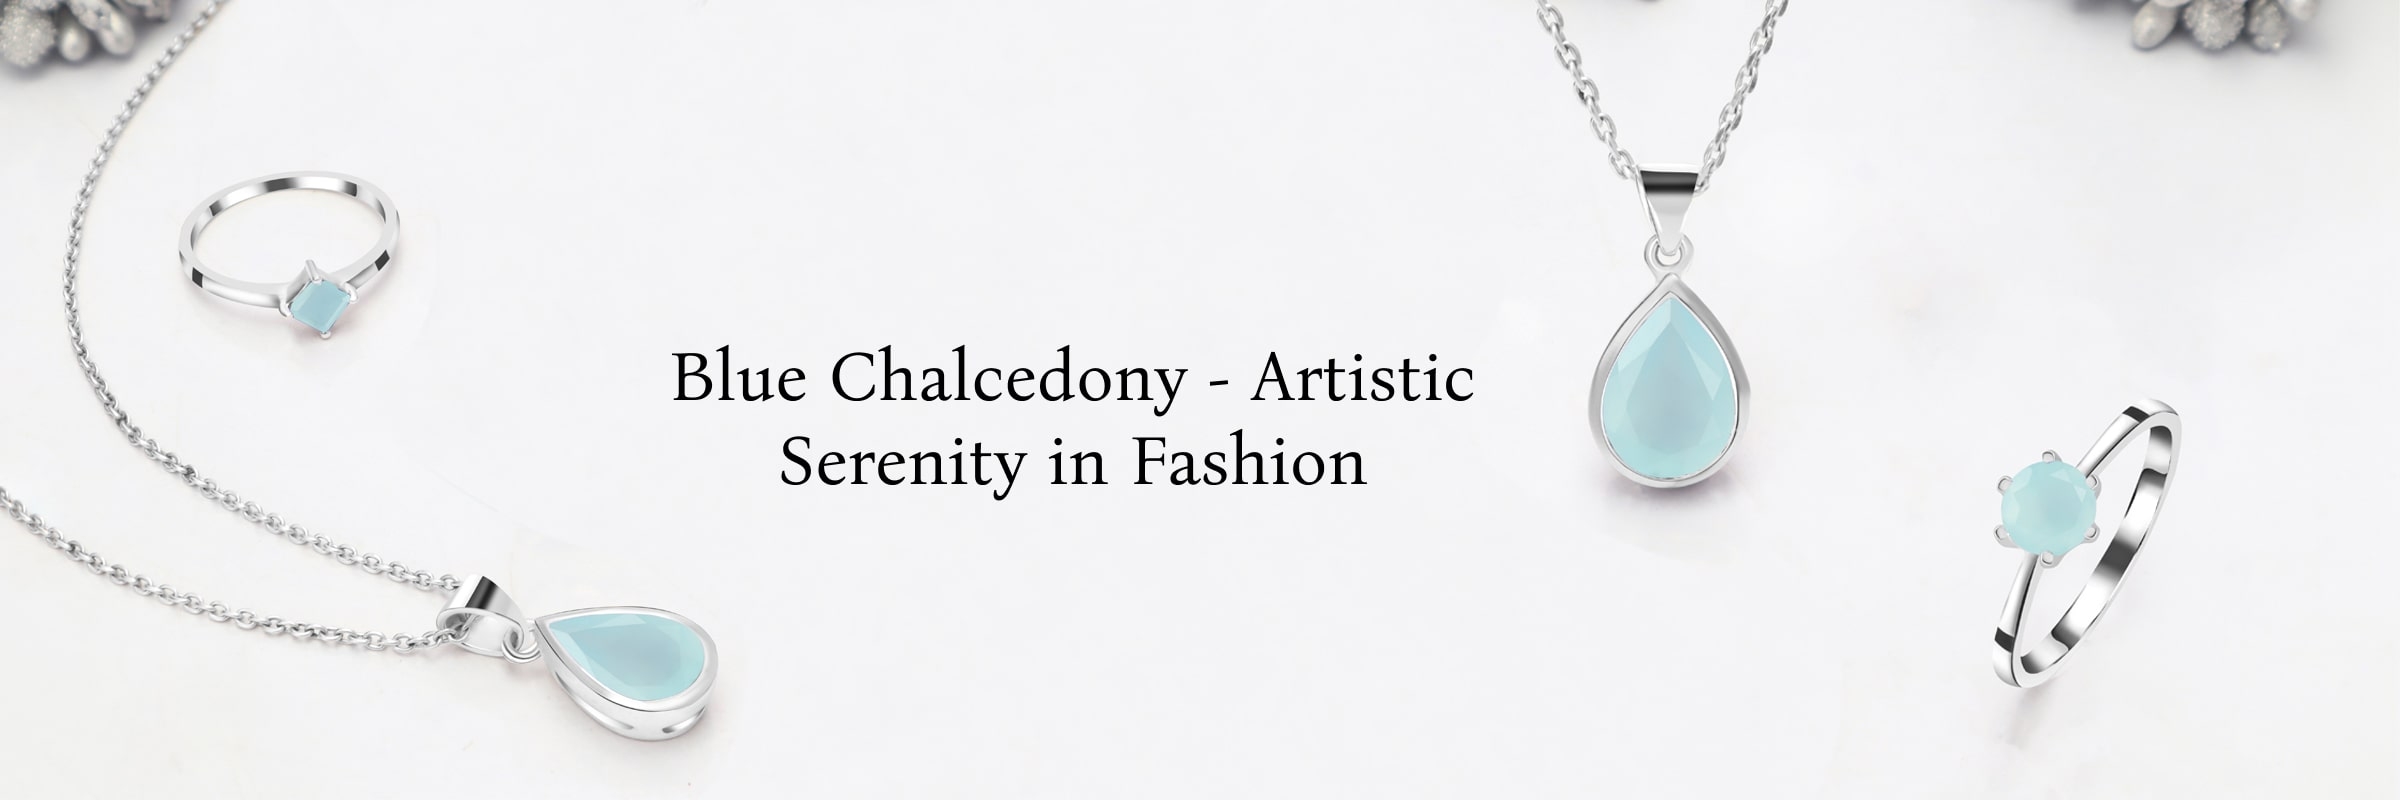 Blue Chalcedony in Art and Fashion: Styling Serenity